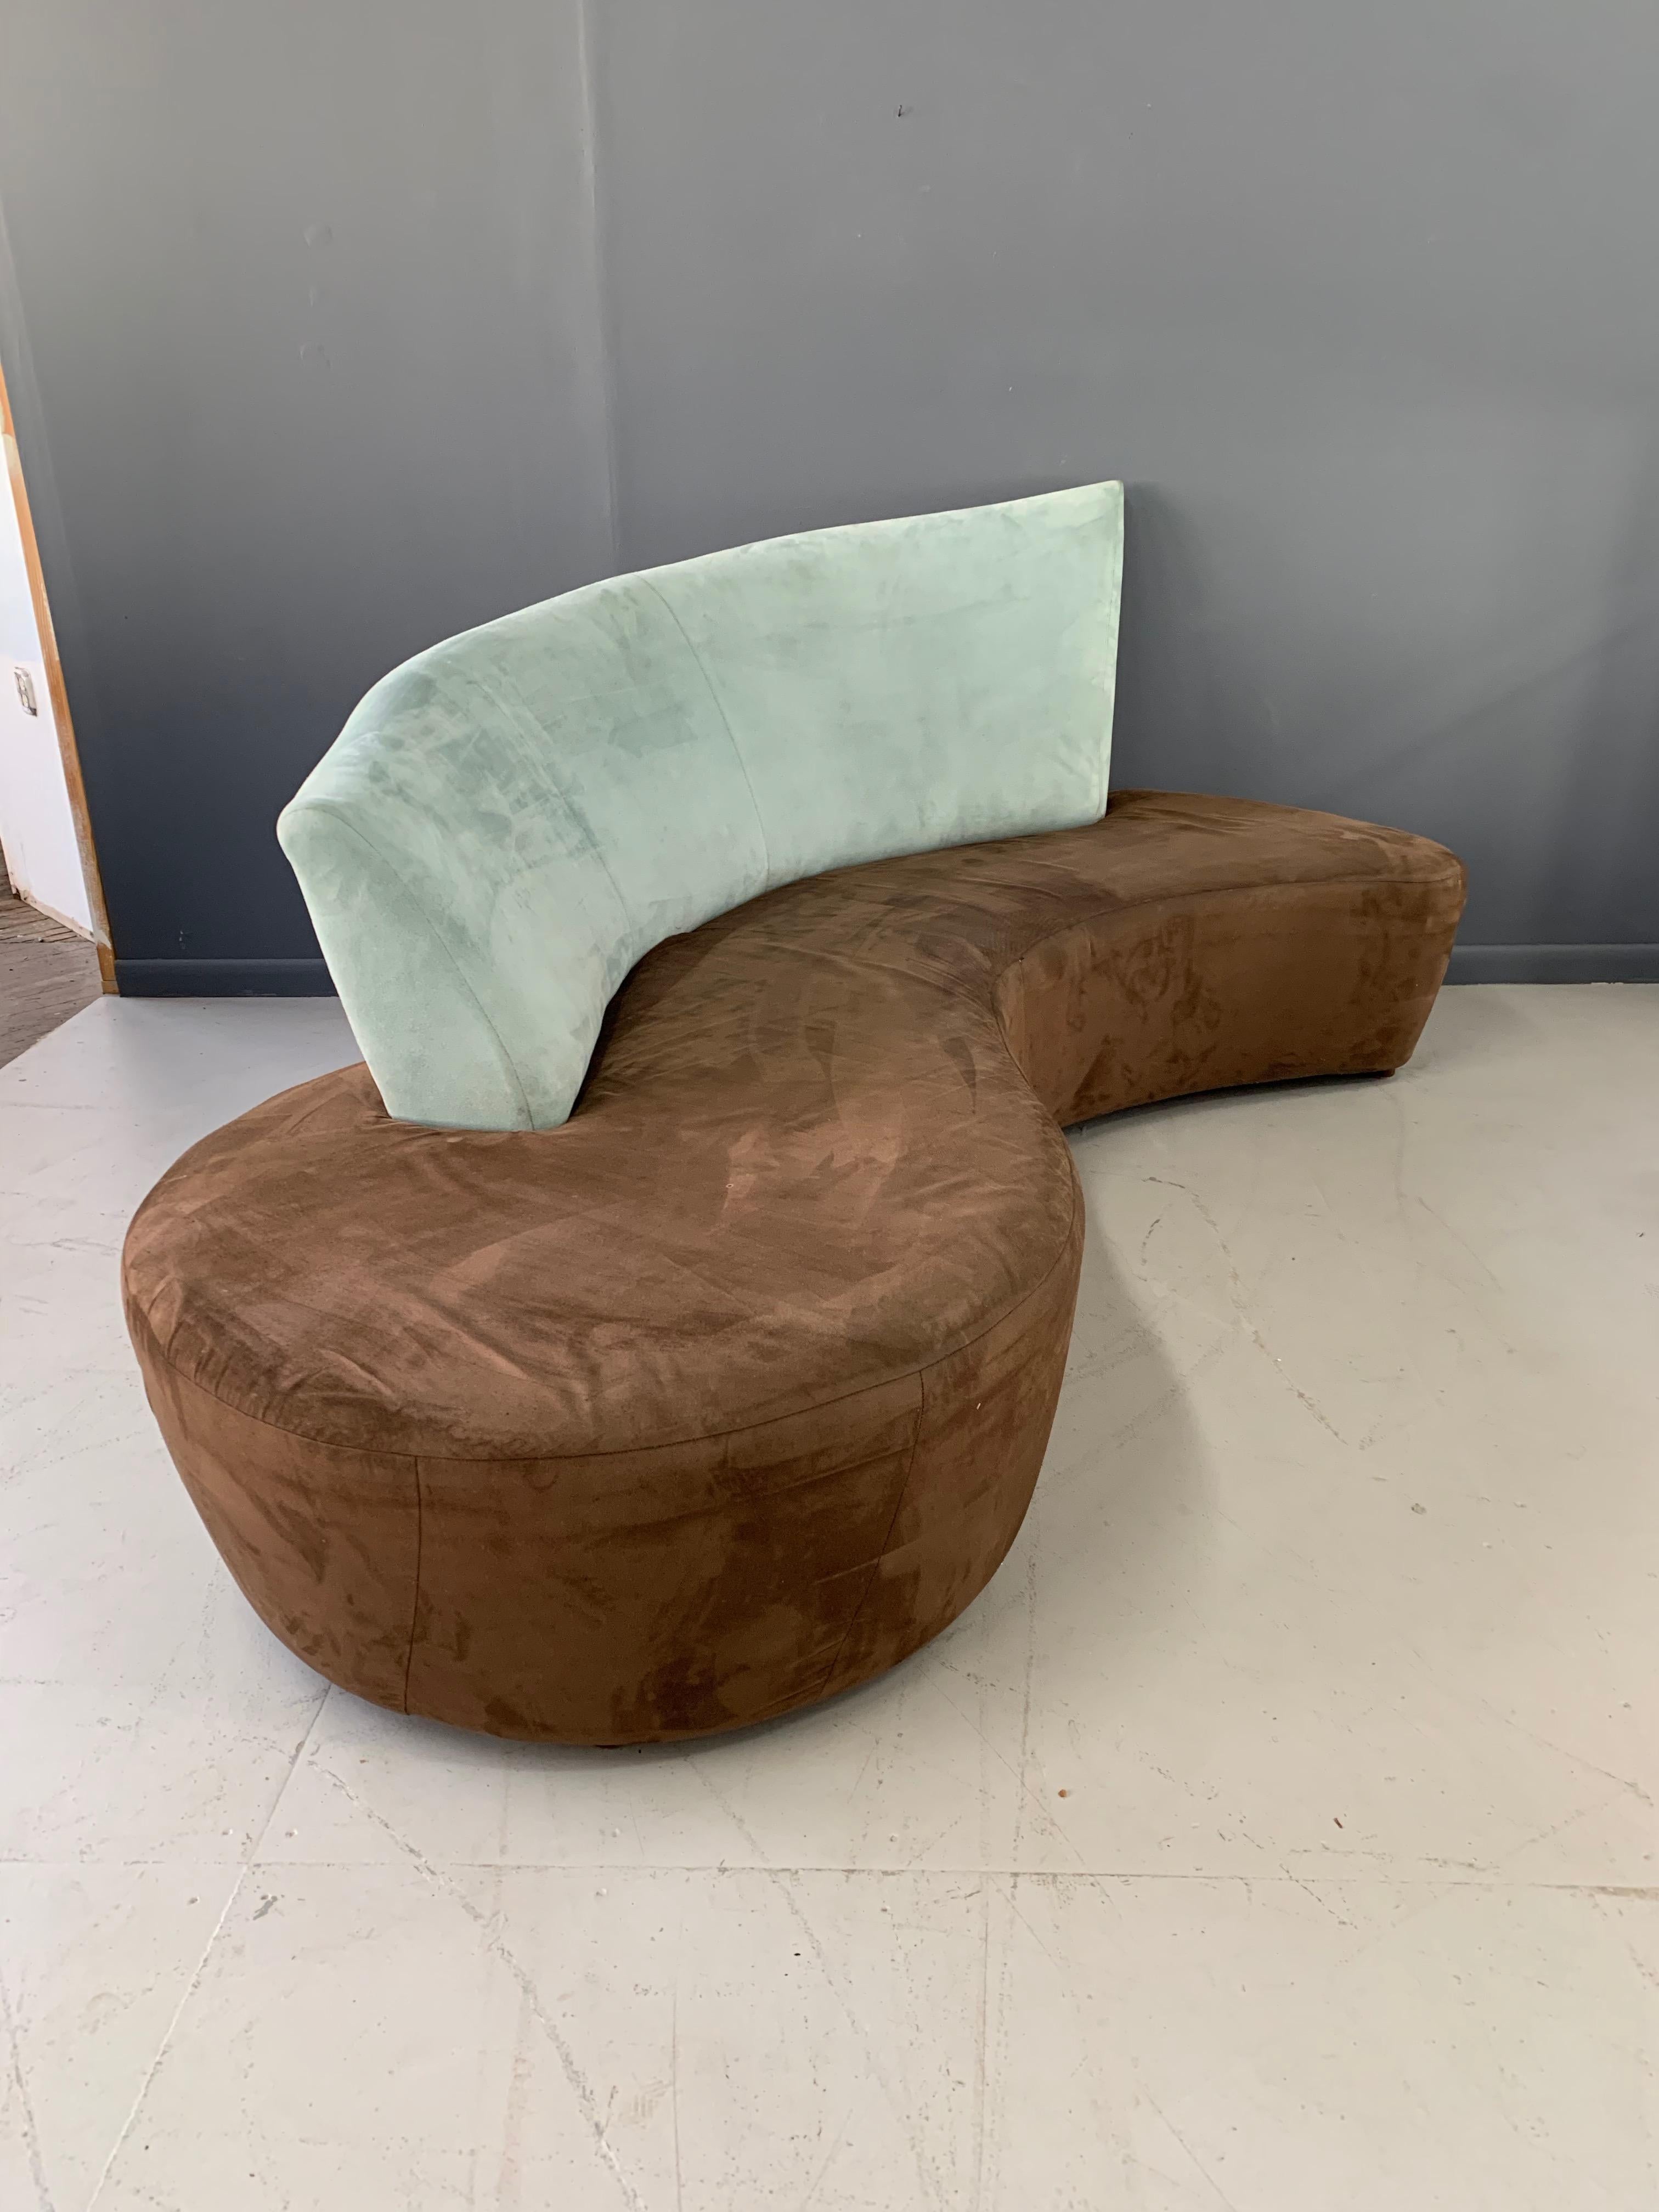 This sofa has a wonderful Postmodern look.

The fabric on this sofa is worn and re-upholstery is warranted, ship us your fabric and we will upholster this sofa for $750.